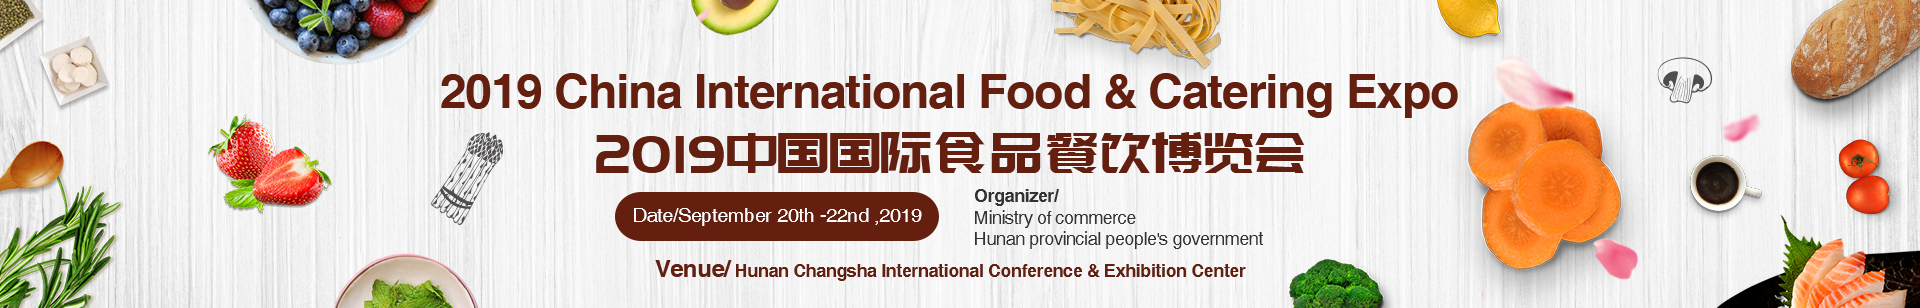 2019 China International Food & Catering Expo